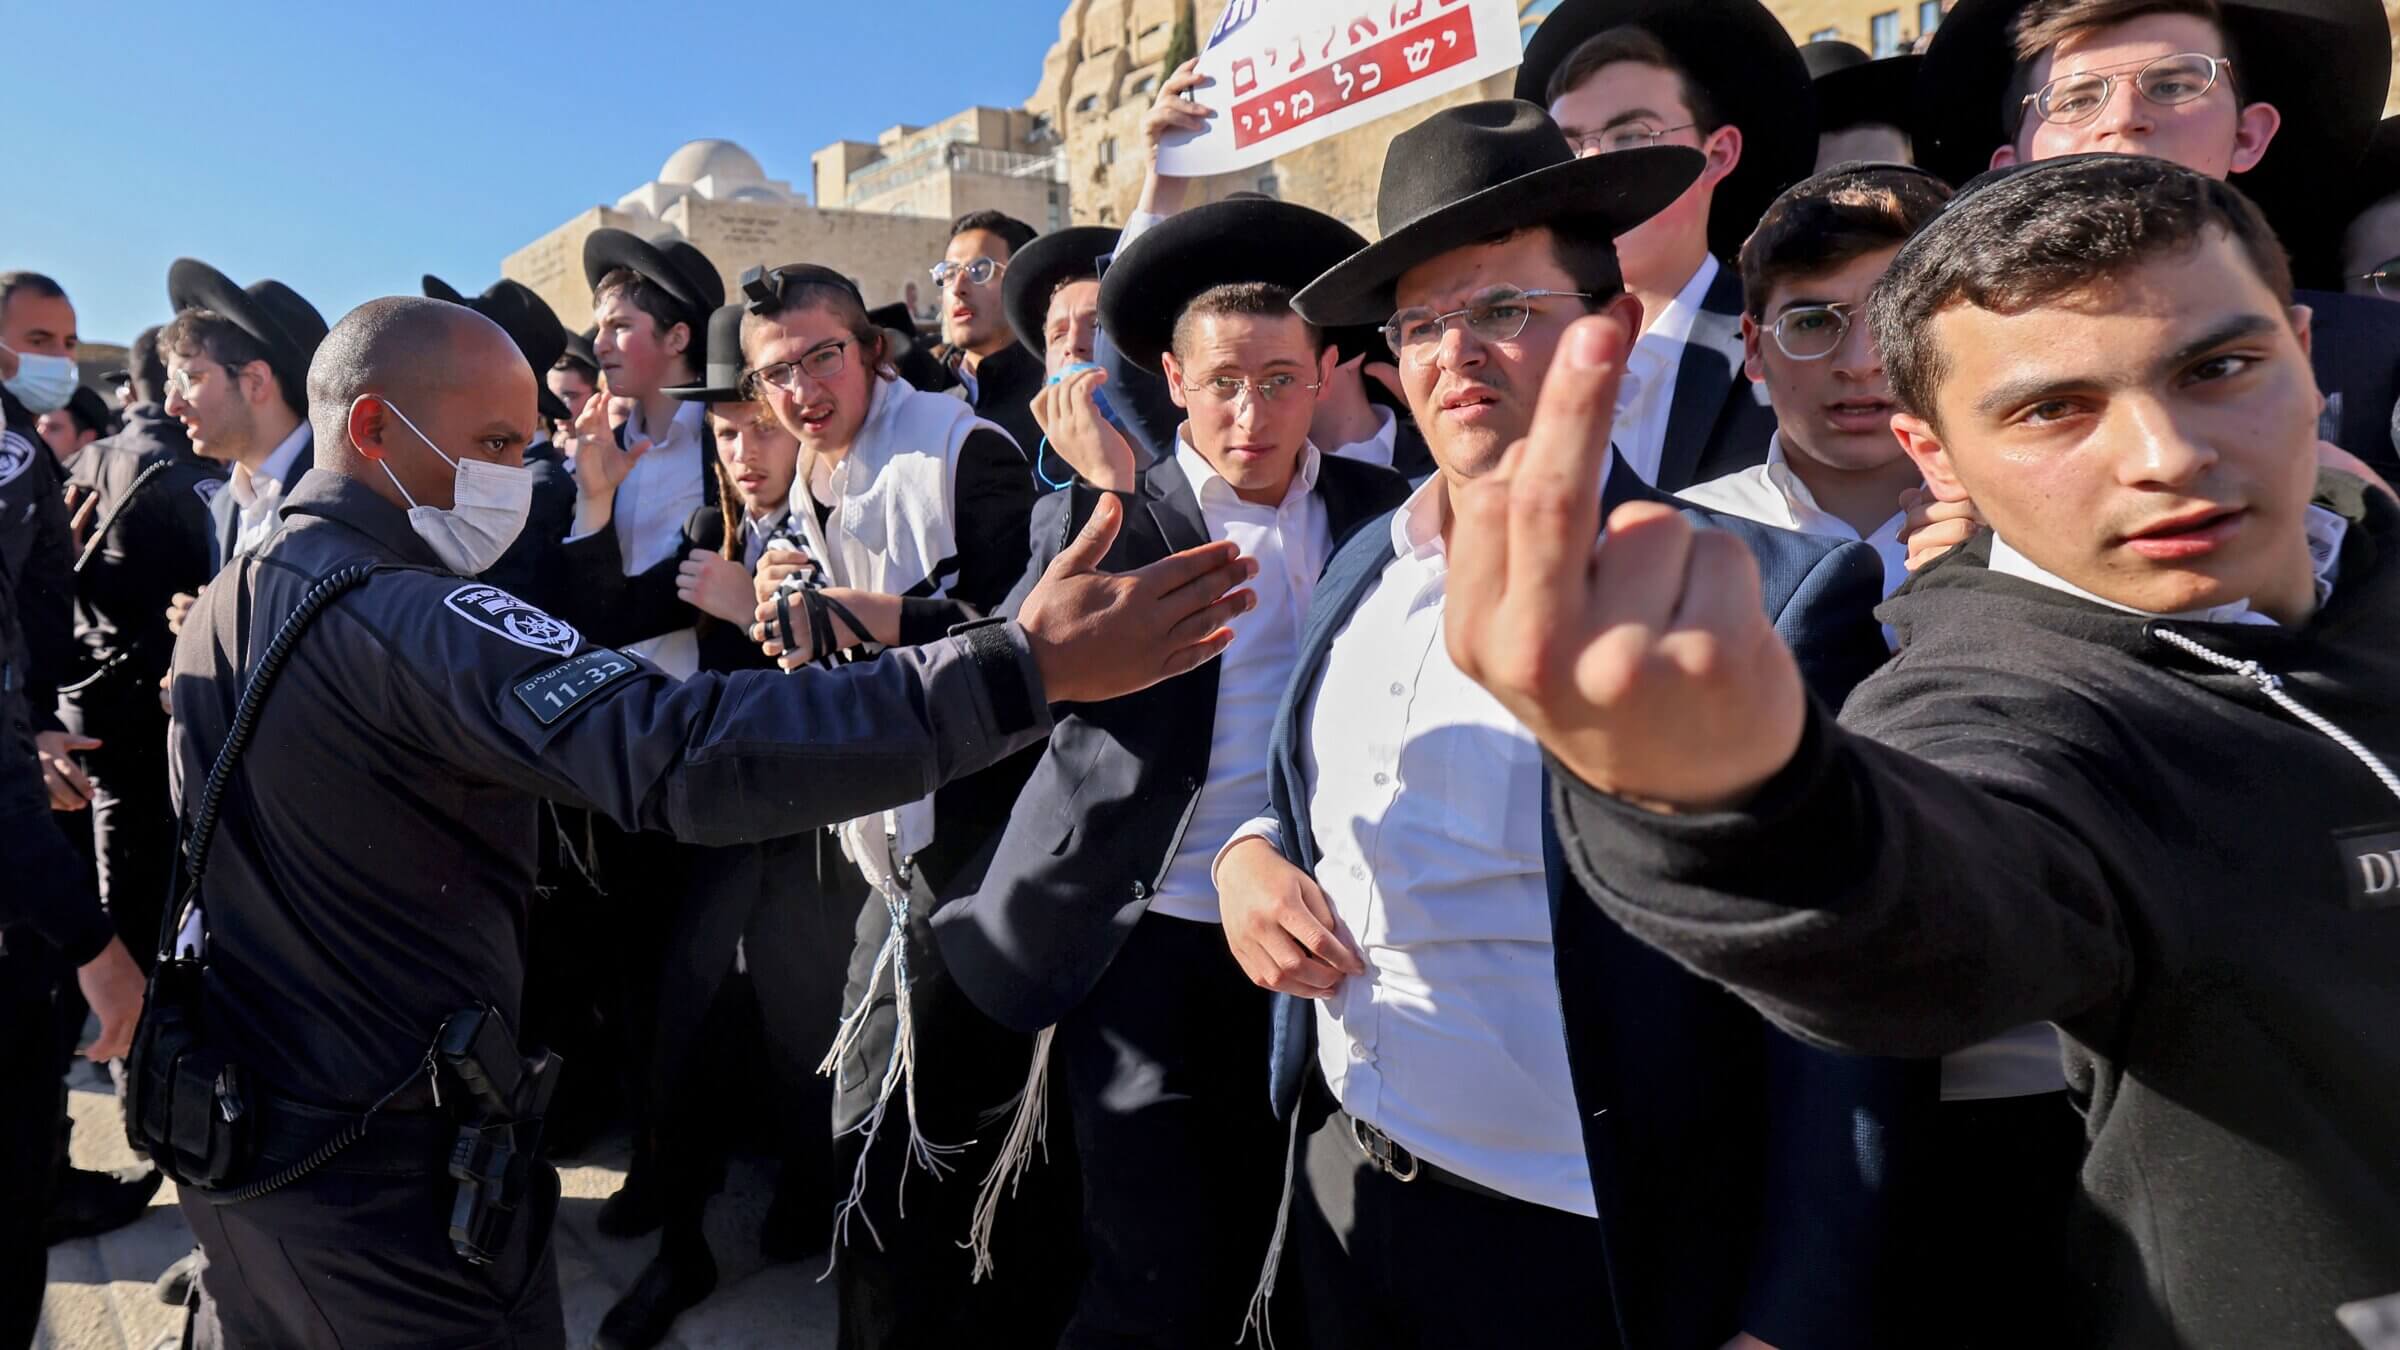 Orthodox Jews clash with Israeli security forces during a protest against "Women of the Wall," a group of women activists that advocates for pluralistic prayer, at the Western Wall in Jerusalem on Nov. 5, 2021. Women of the Wall were met with violence at the Western Wall as they tried to enter the plaza holding Torah scrolls in a long-running campaign for gender equality at the site.